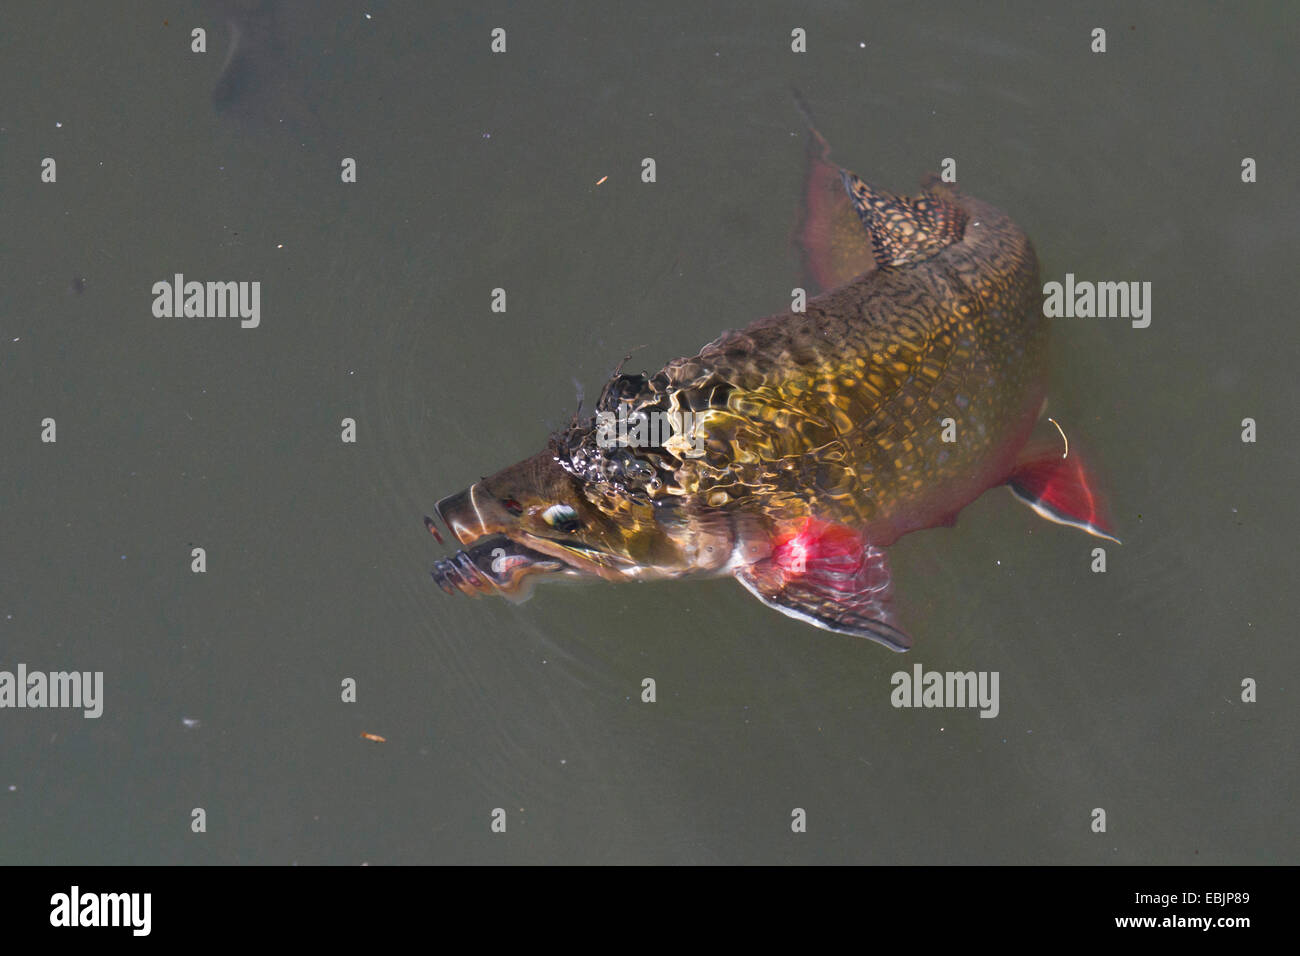 brook trout, brook char, brook charr (Salvelinus fontinalis), eating insect at water surface Stock Photo